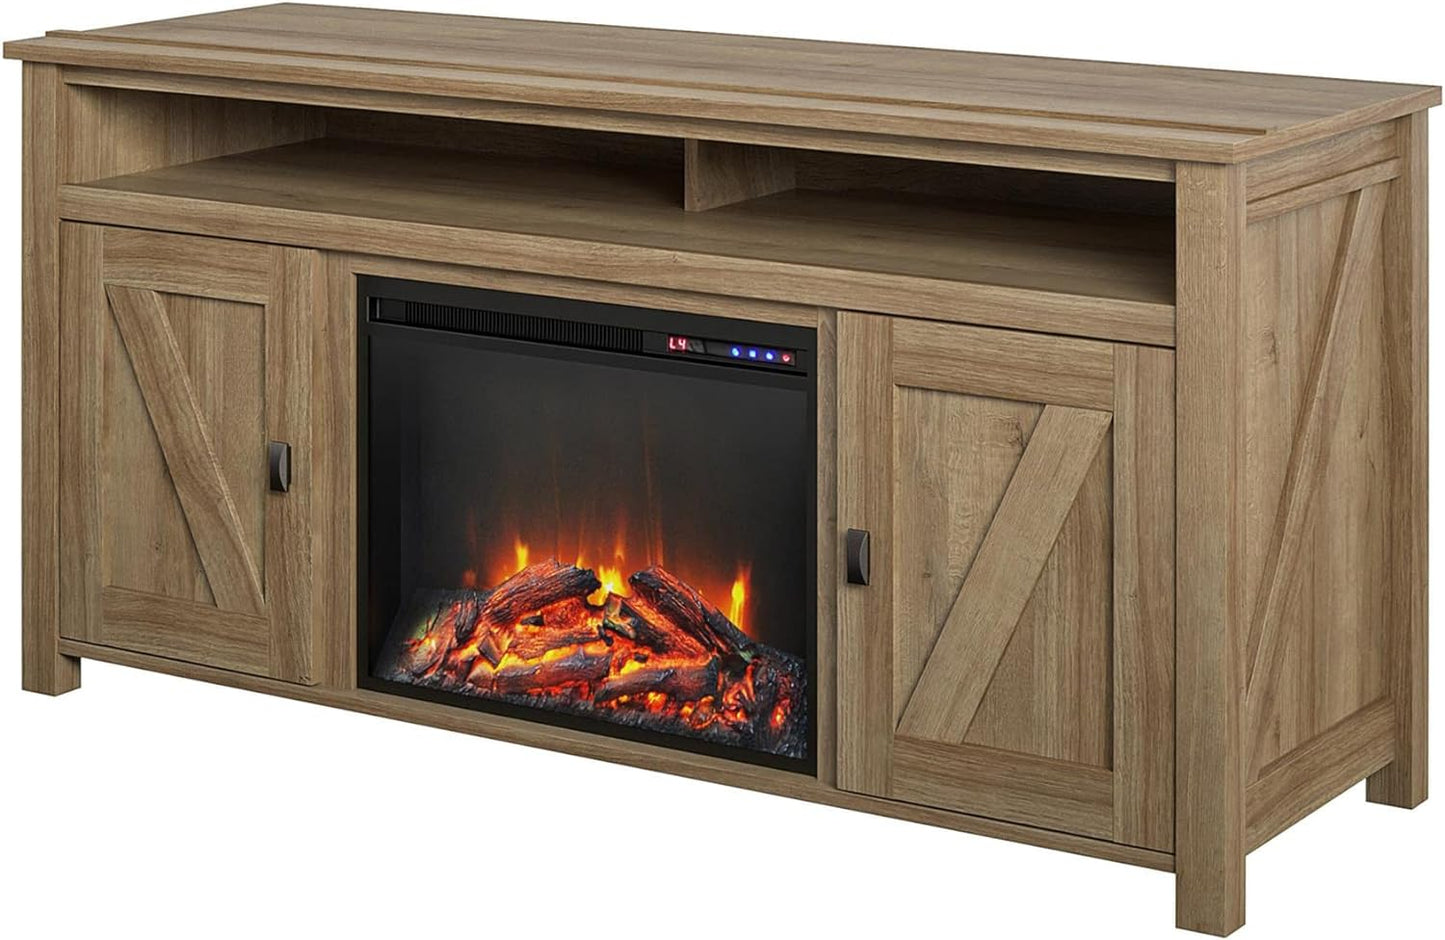 "Cozy Farmington Electric Fireplace TV Console - Perfect for Tvs up to 60" - Natural Beauty at Its Finest"